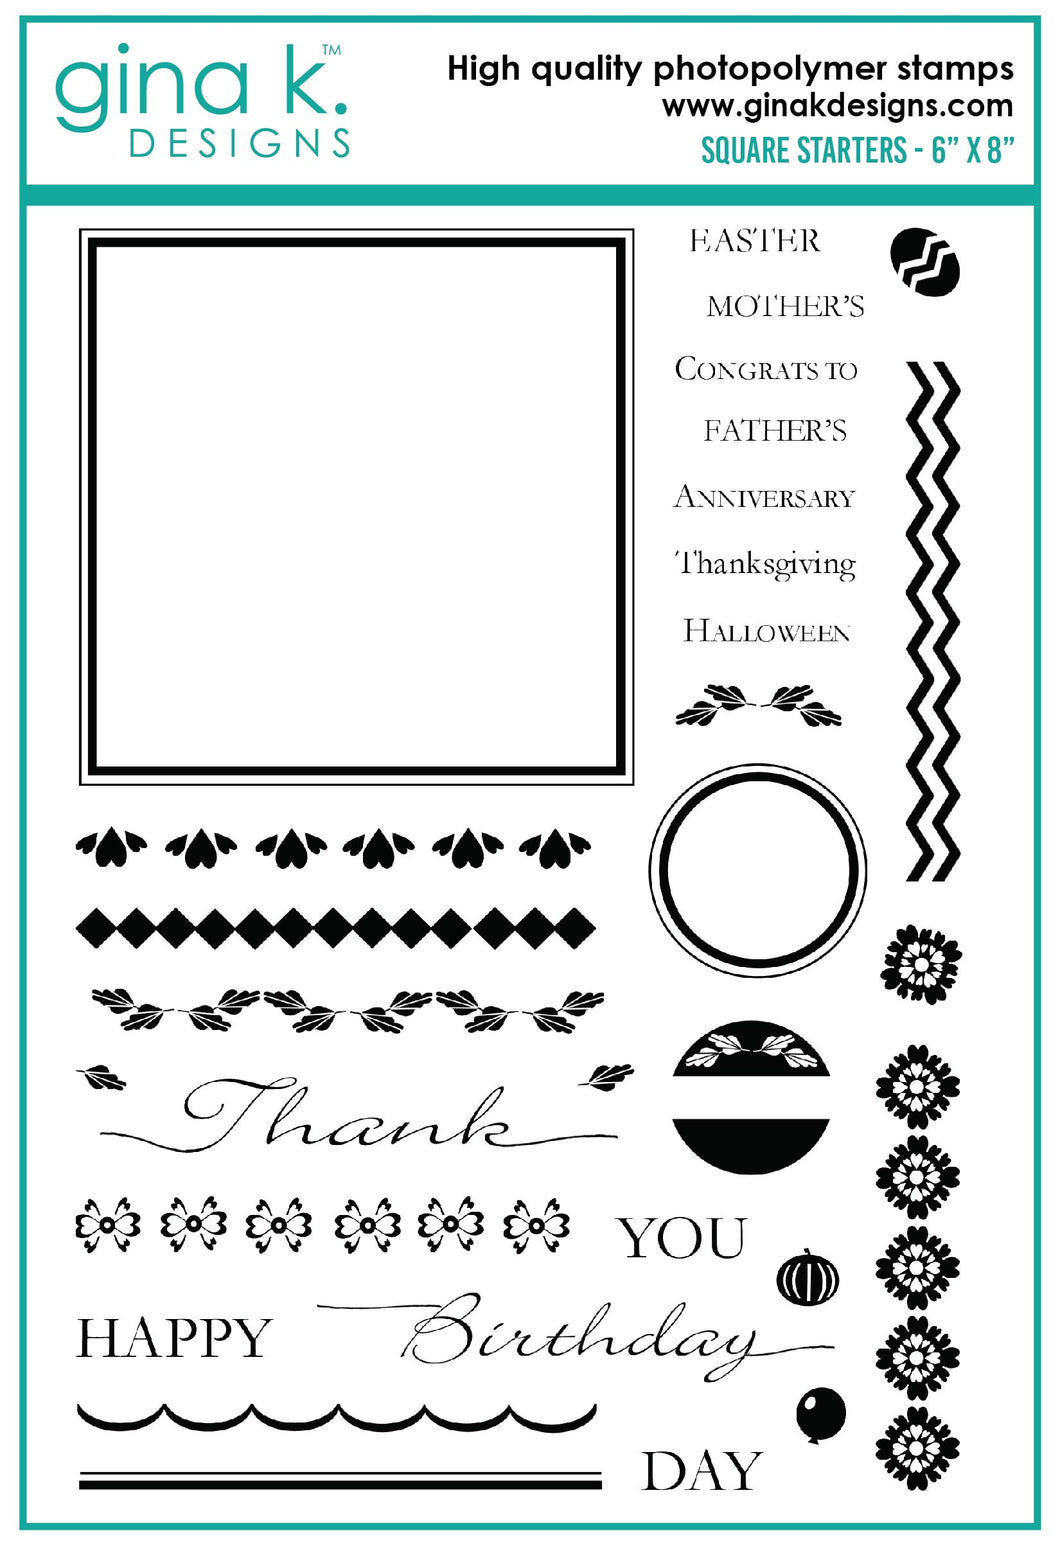 Gina K. Designs - Stamps - Square Starters. Square Starters is a stamp set by Melanie Munchinger. This set is made of premium clear photopolymer and measures 6